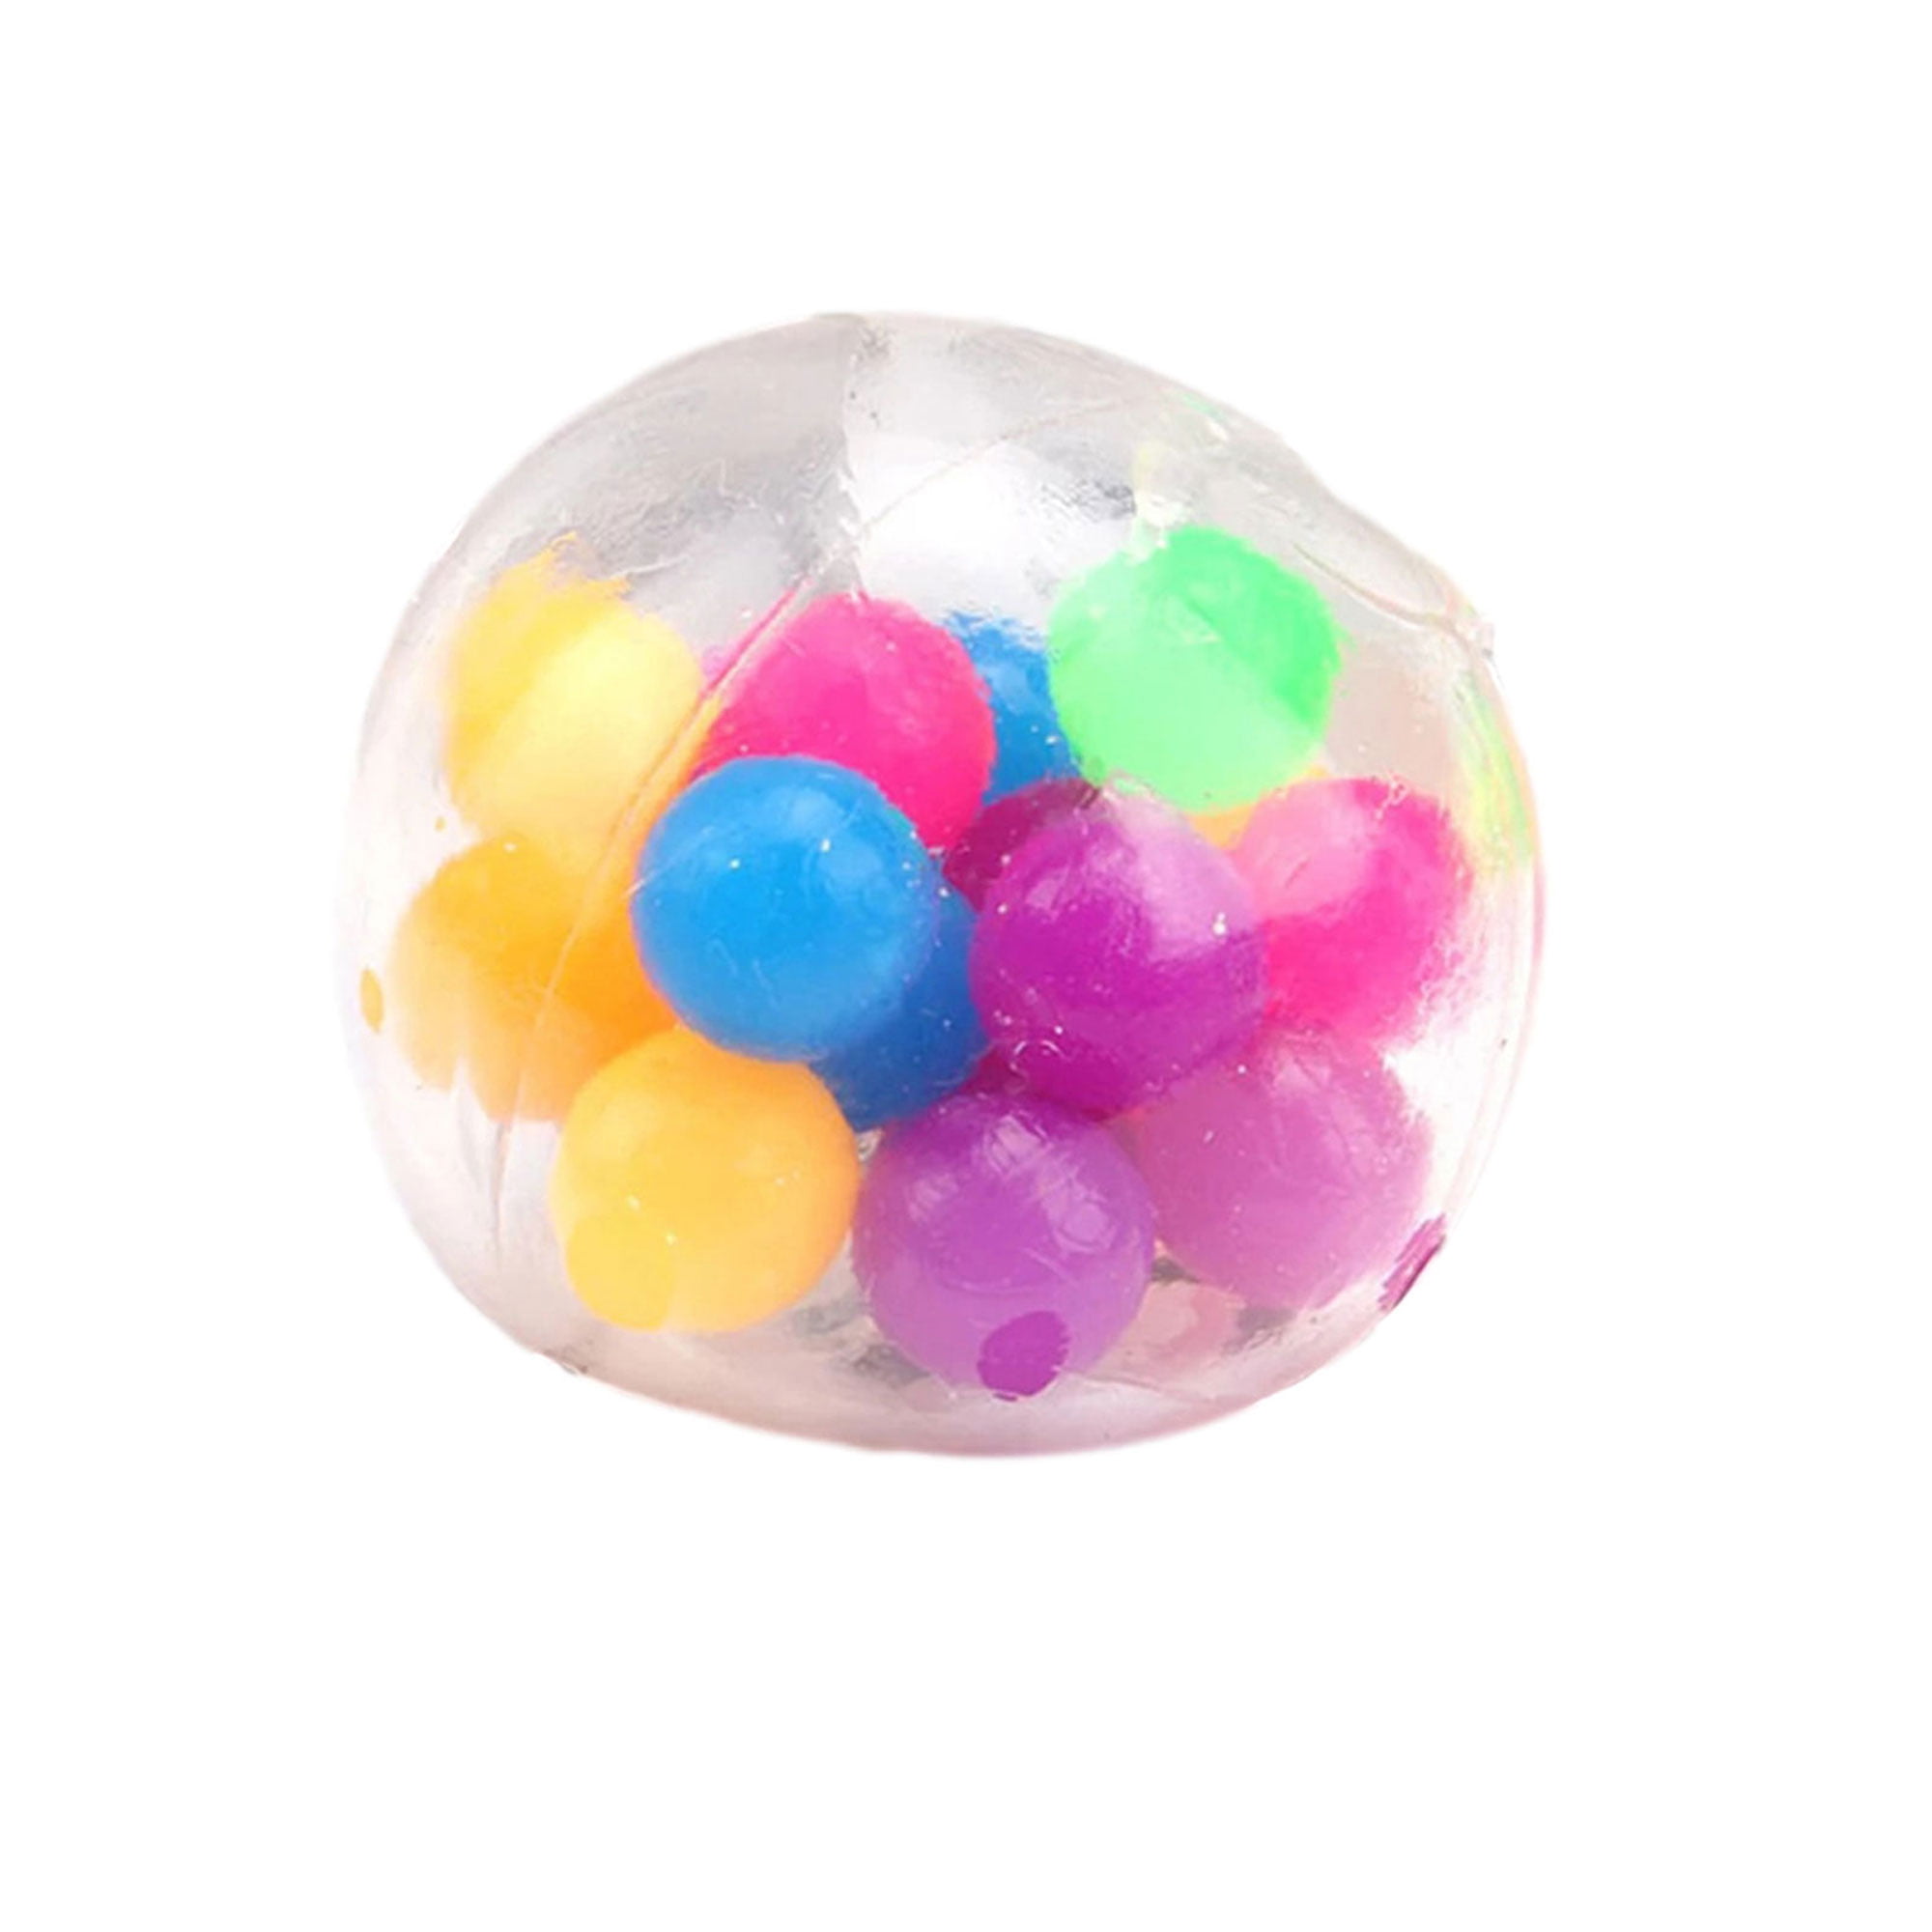 2X Anxiety Reliever UK Peach & DNA Stress Ball Fidget Sensory Toys Squeeze Ball 